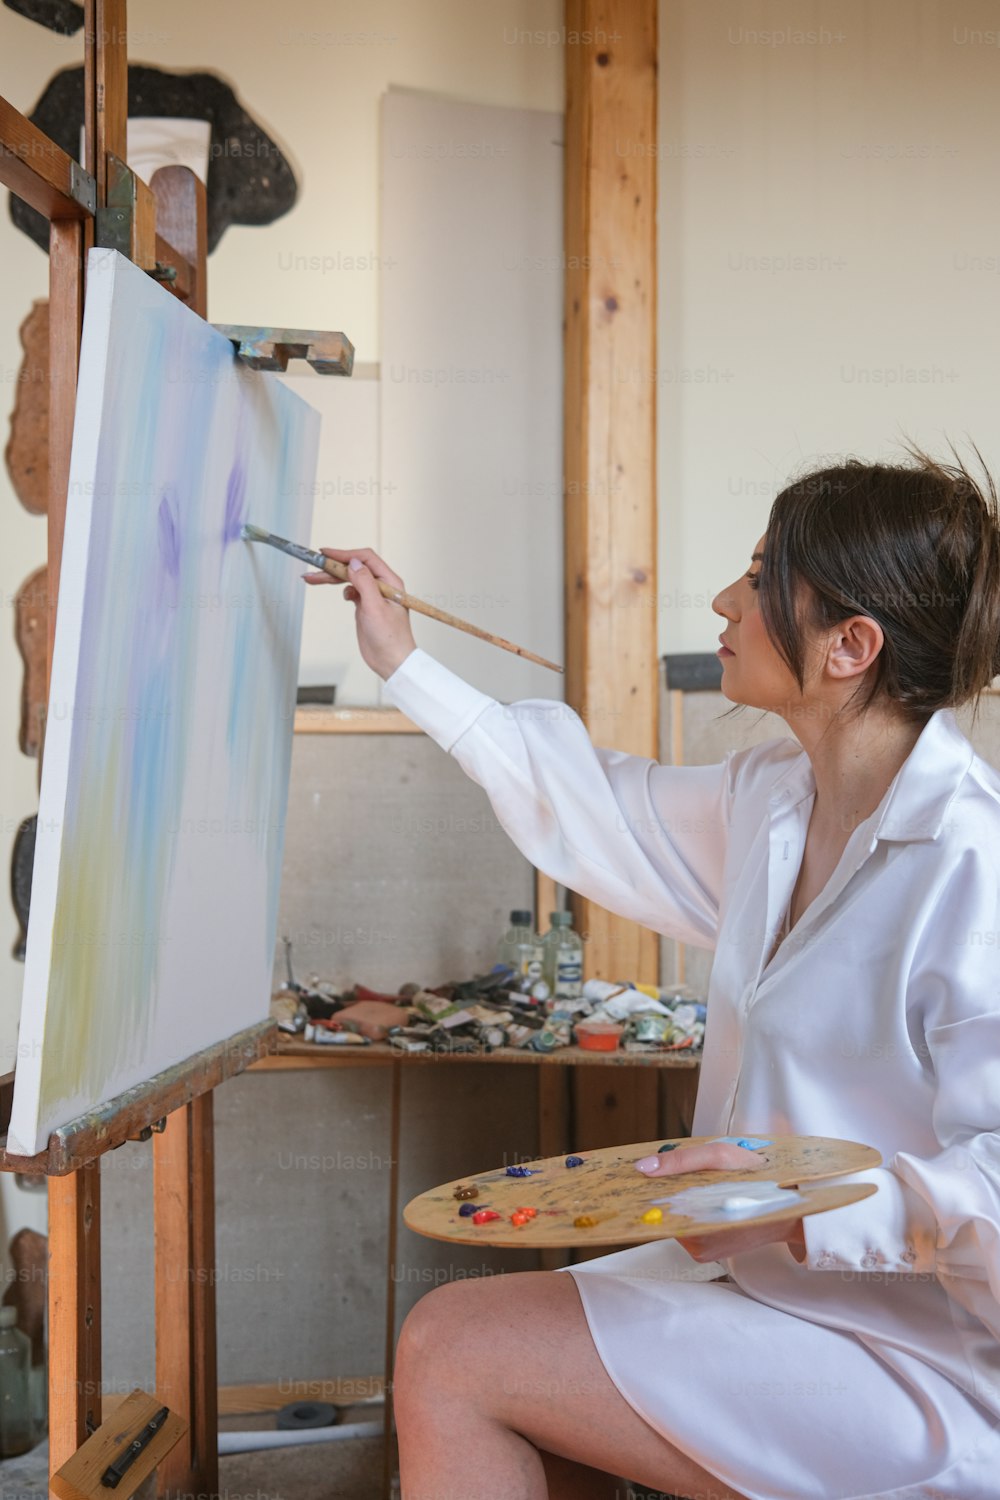 a woman in a white shirt is painting on a easel